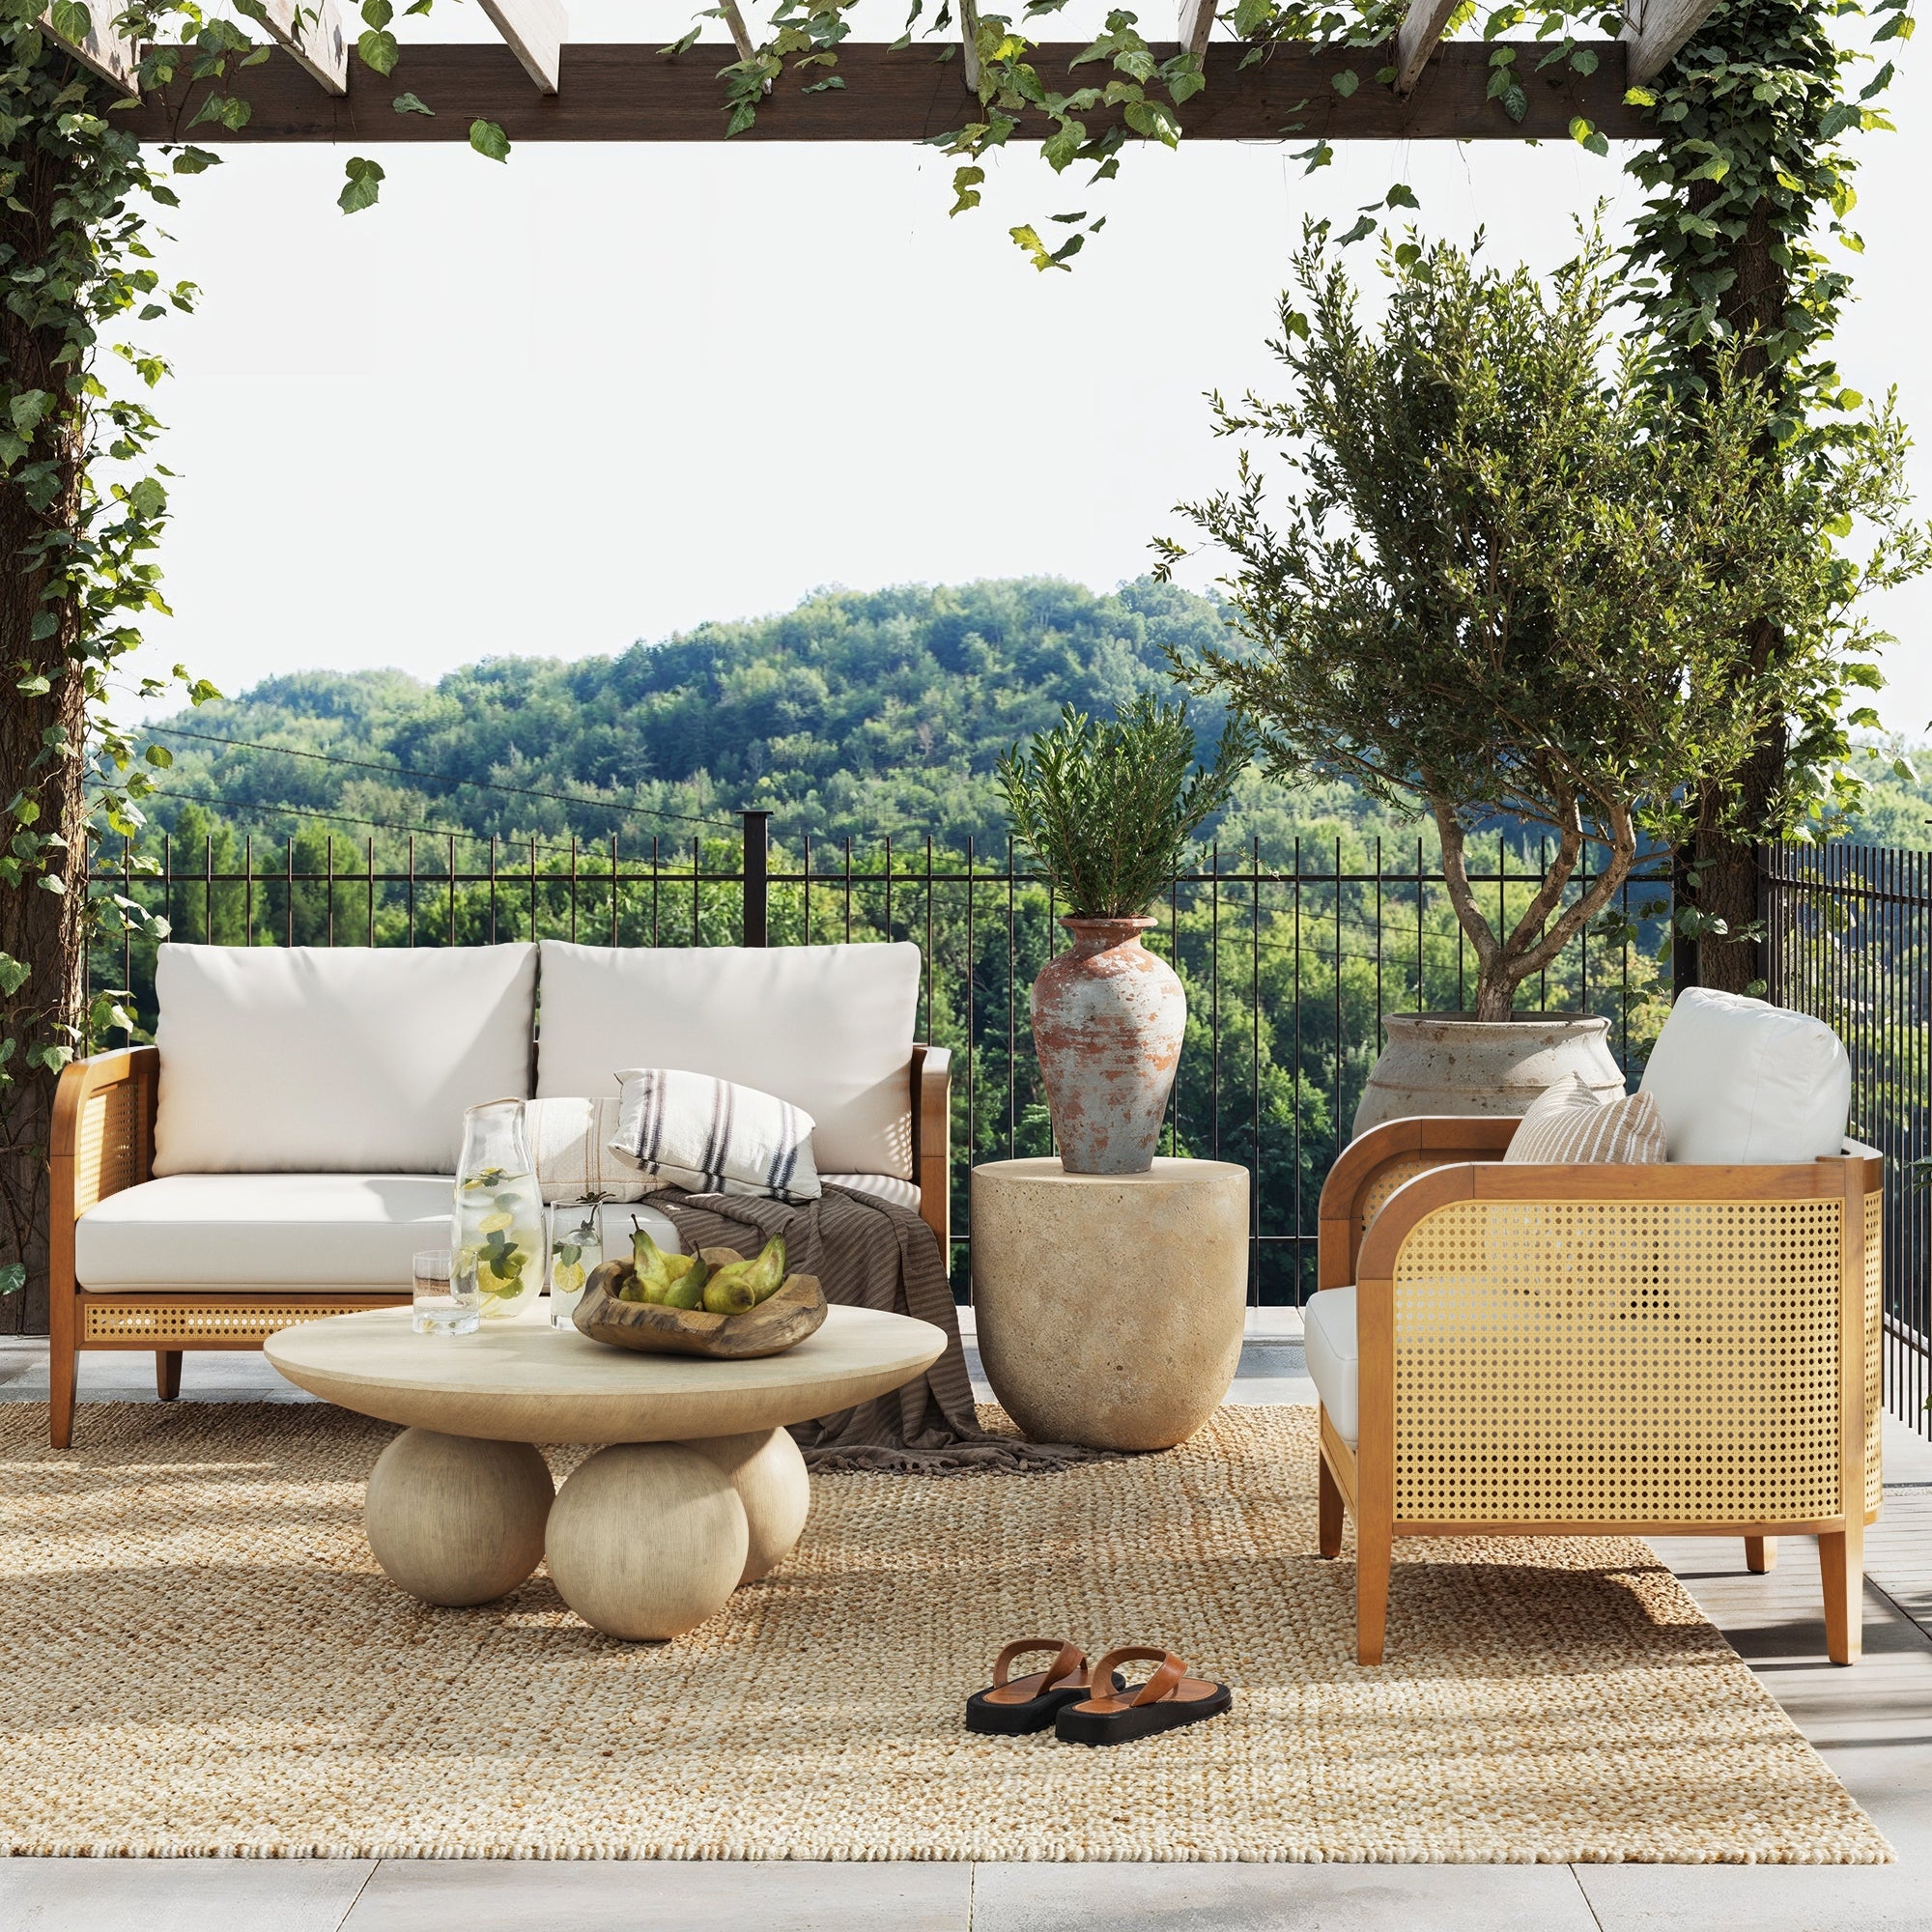 Rattan Outdoor Patio Cushioned Arm Chair